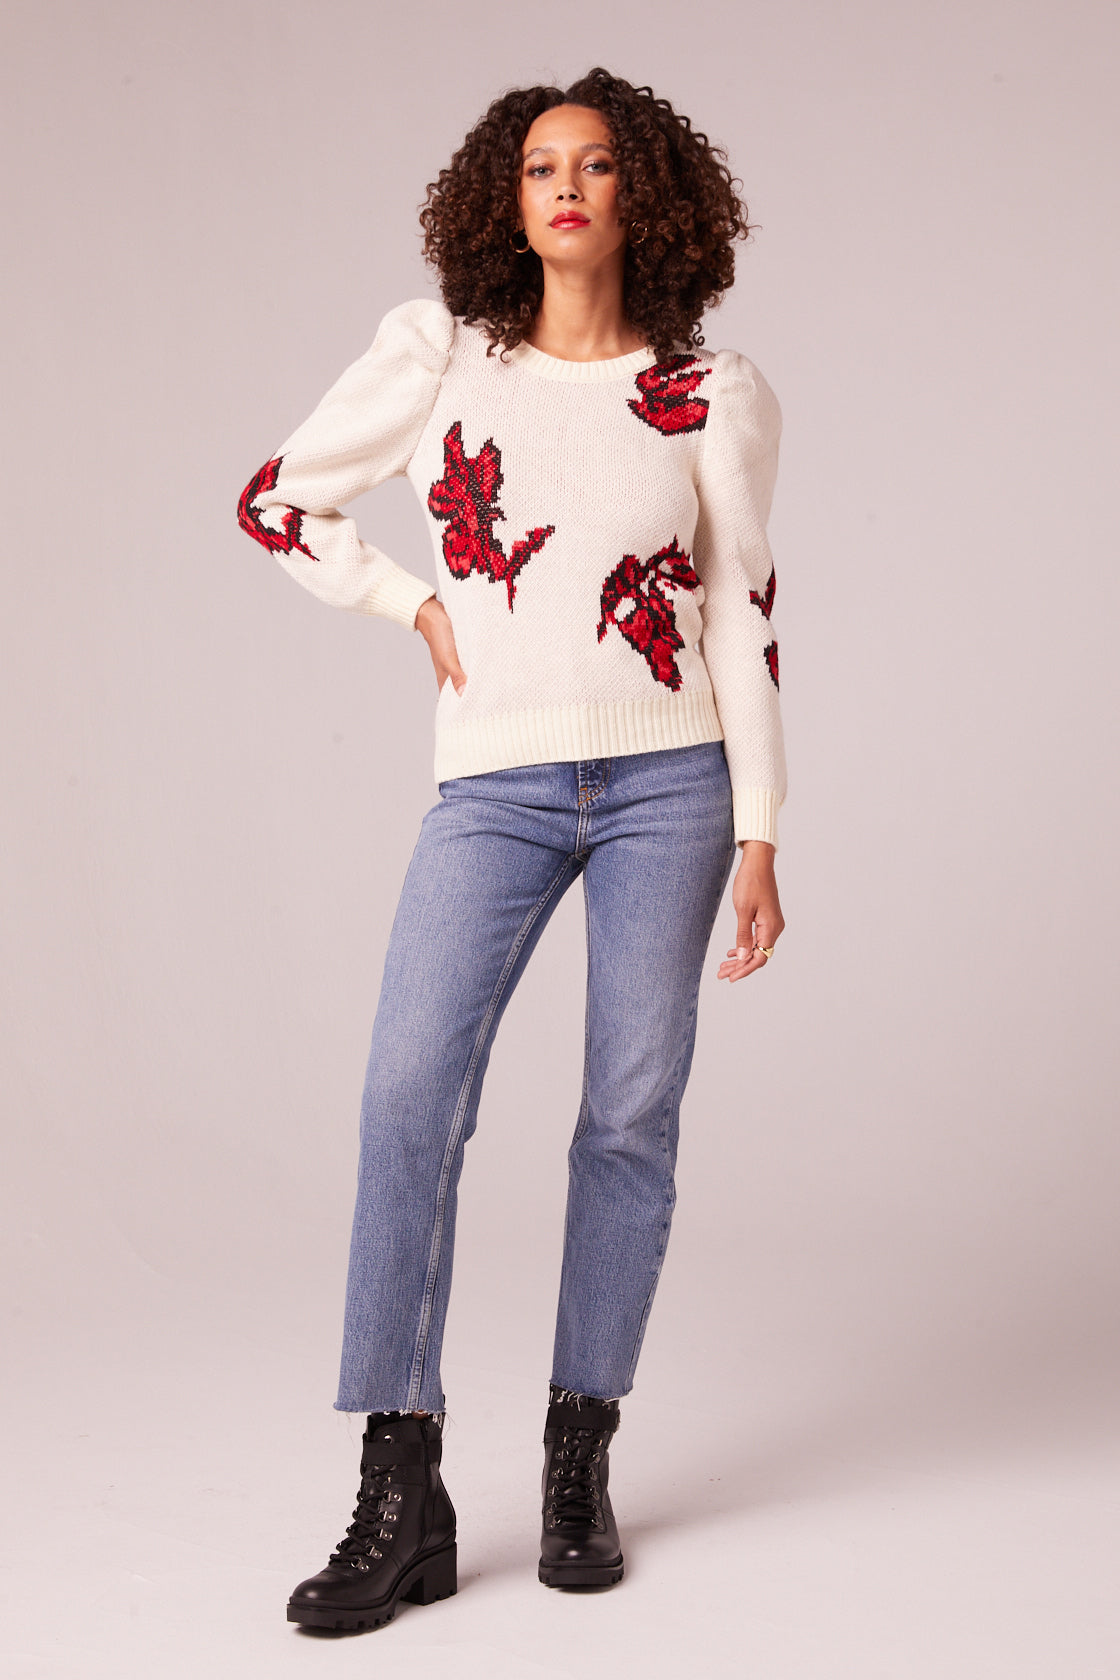 Cynthia Ivory V Neck Knit Sweater – The Wildflower Shop